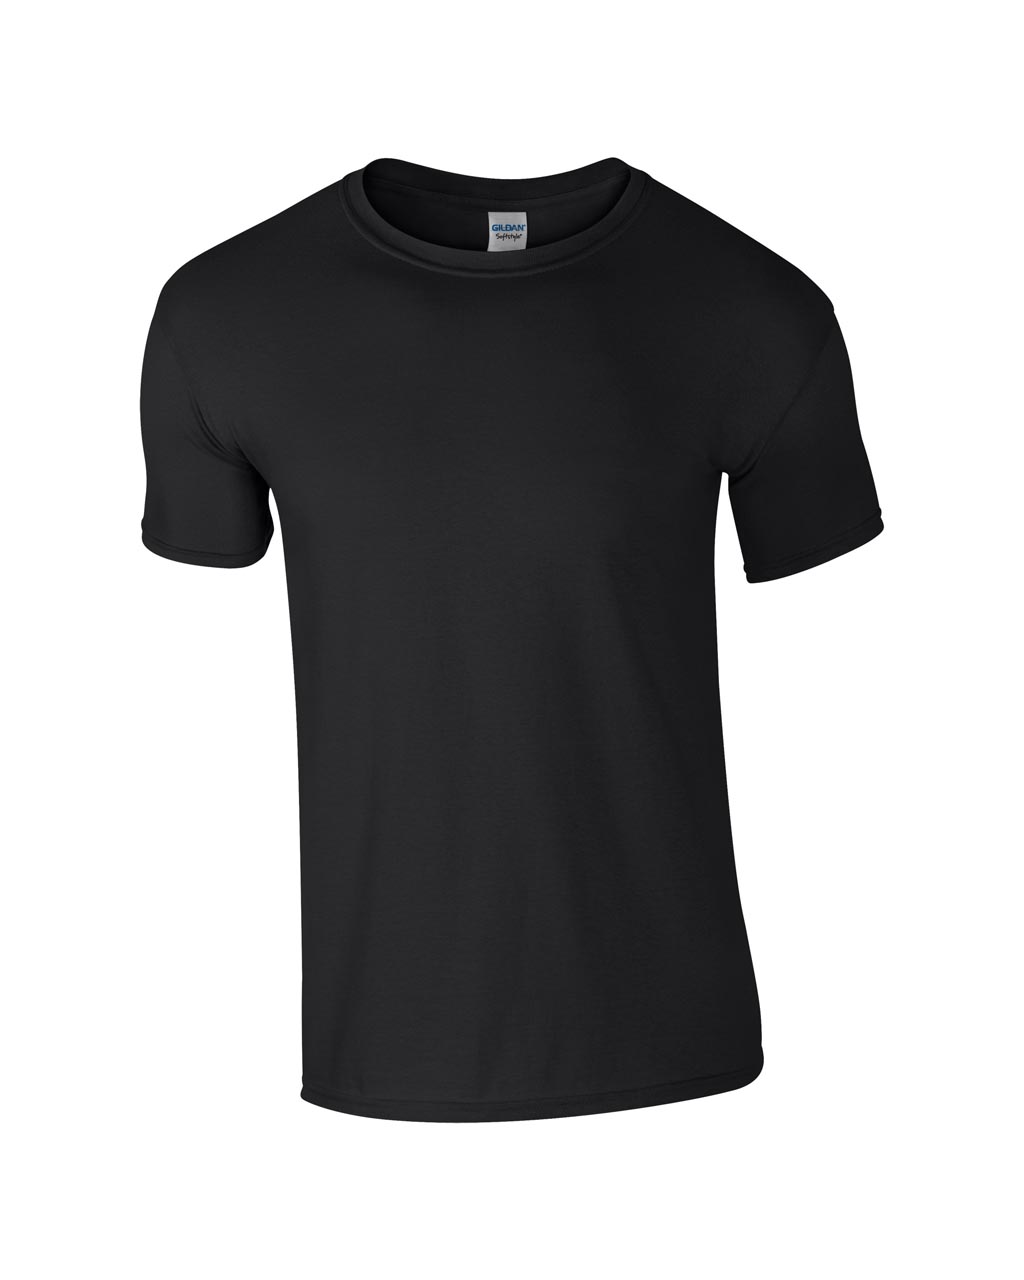 SOFTSTYLE<SUP>®</SUP> ADULT T-SHIRT